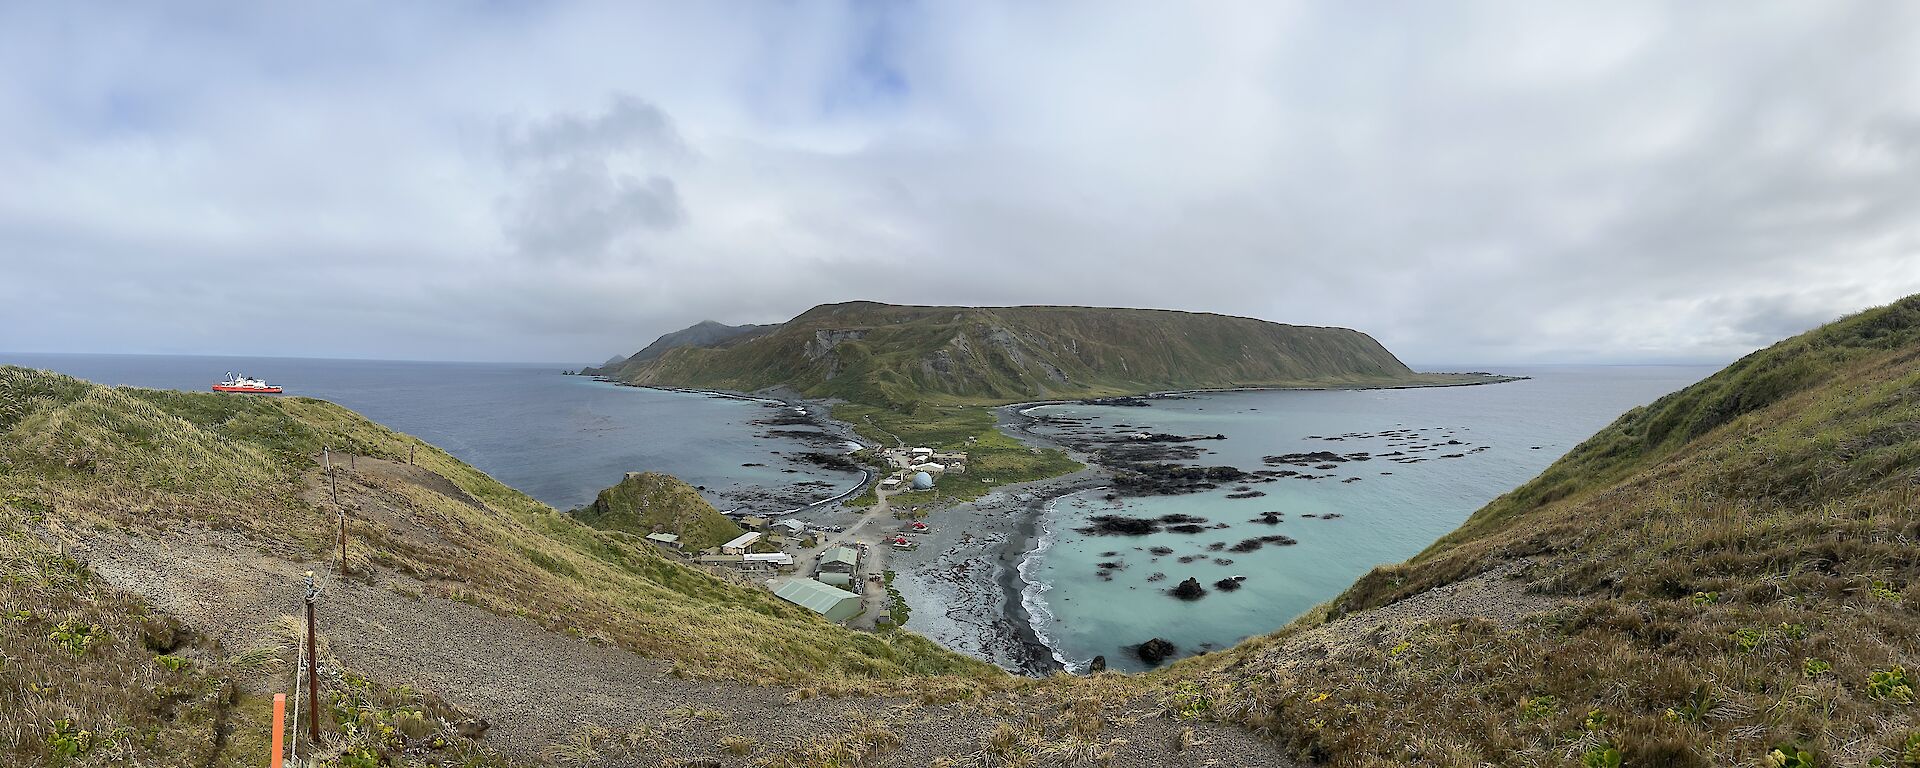 Wide view of Macquarie Island station